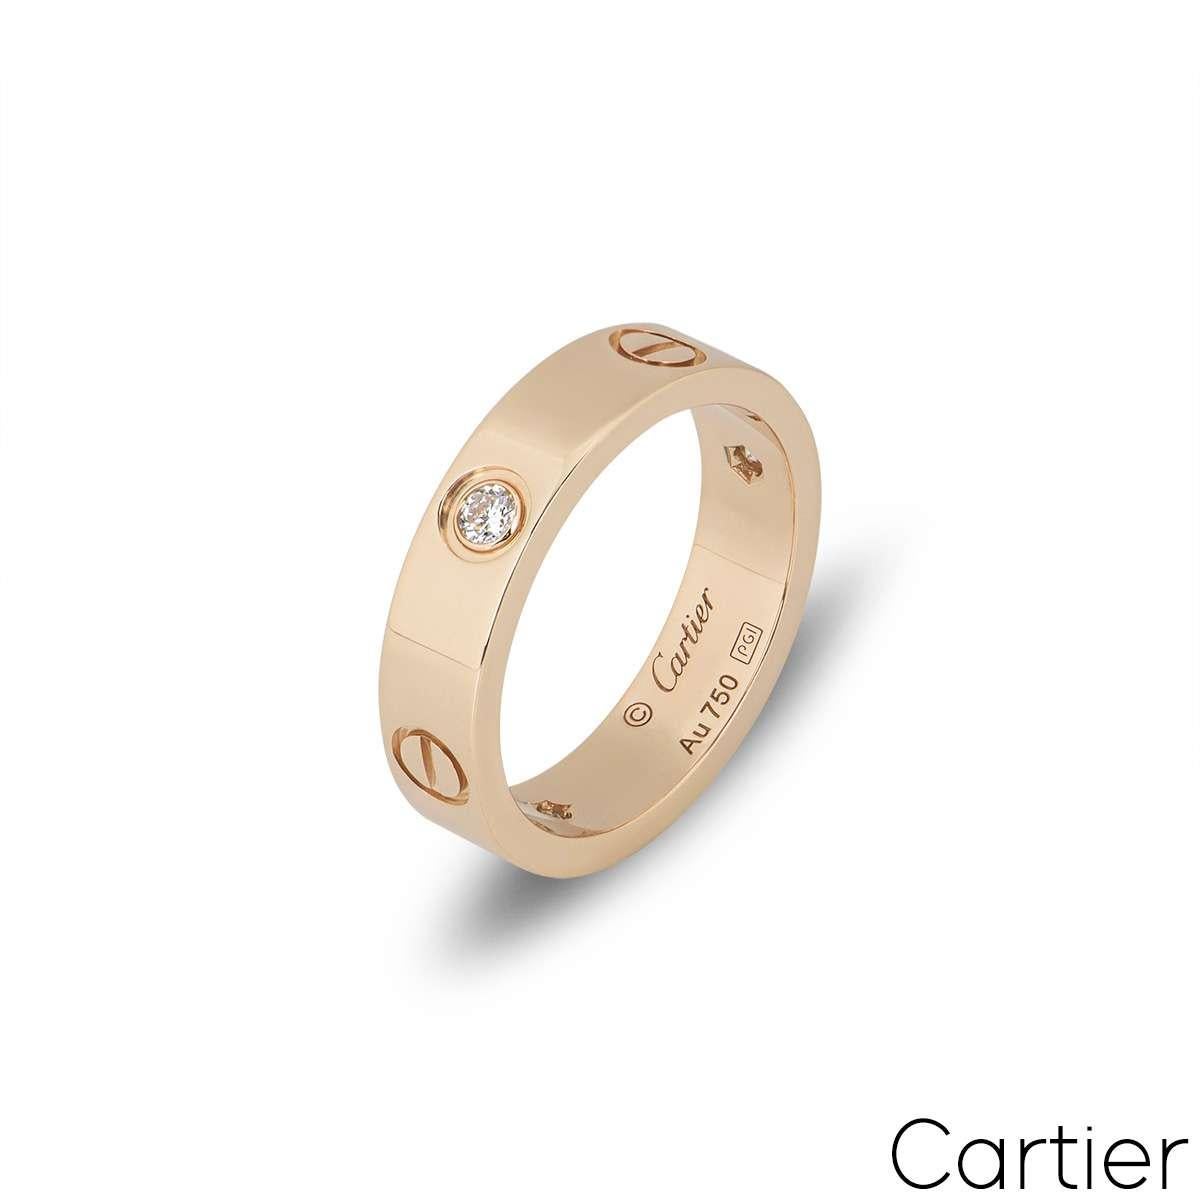 A signature ring from the Love collection by Cartier in rose gold. The ring is set with 3 round brilliant cut diamonds totalling 0.22ct, alternating between the iconic Cartier screws through the centre of the band. Measuring 5.5mm in width, the ring